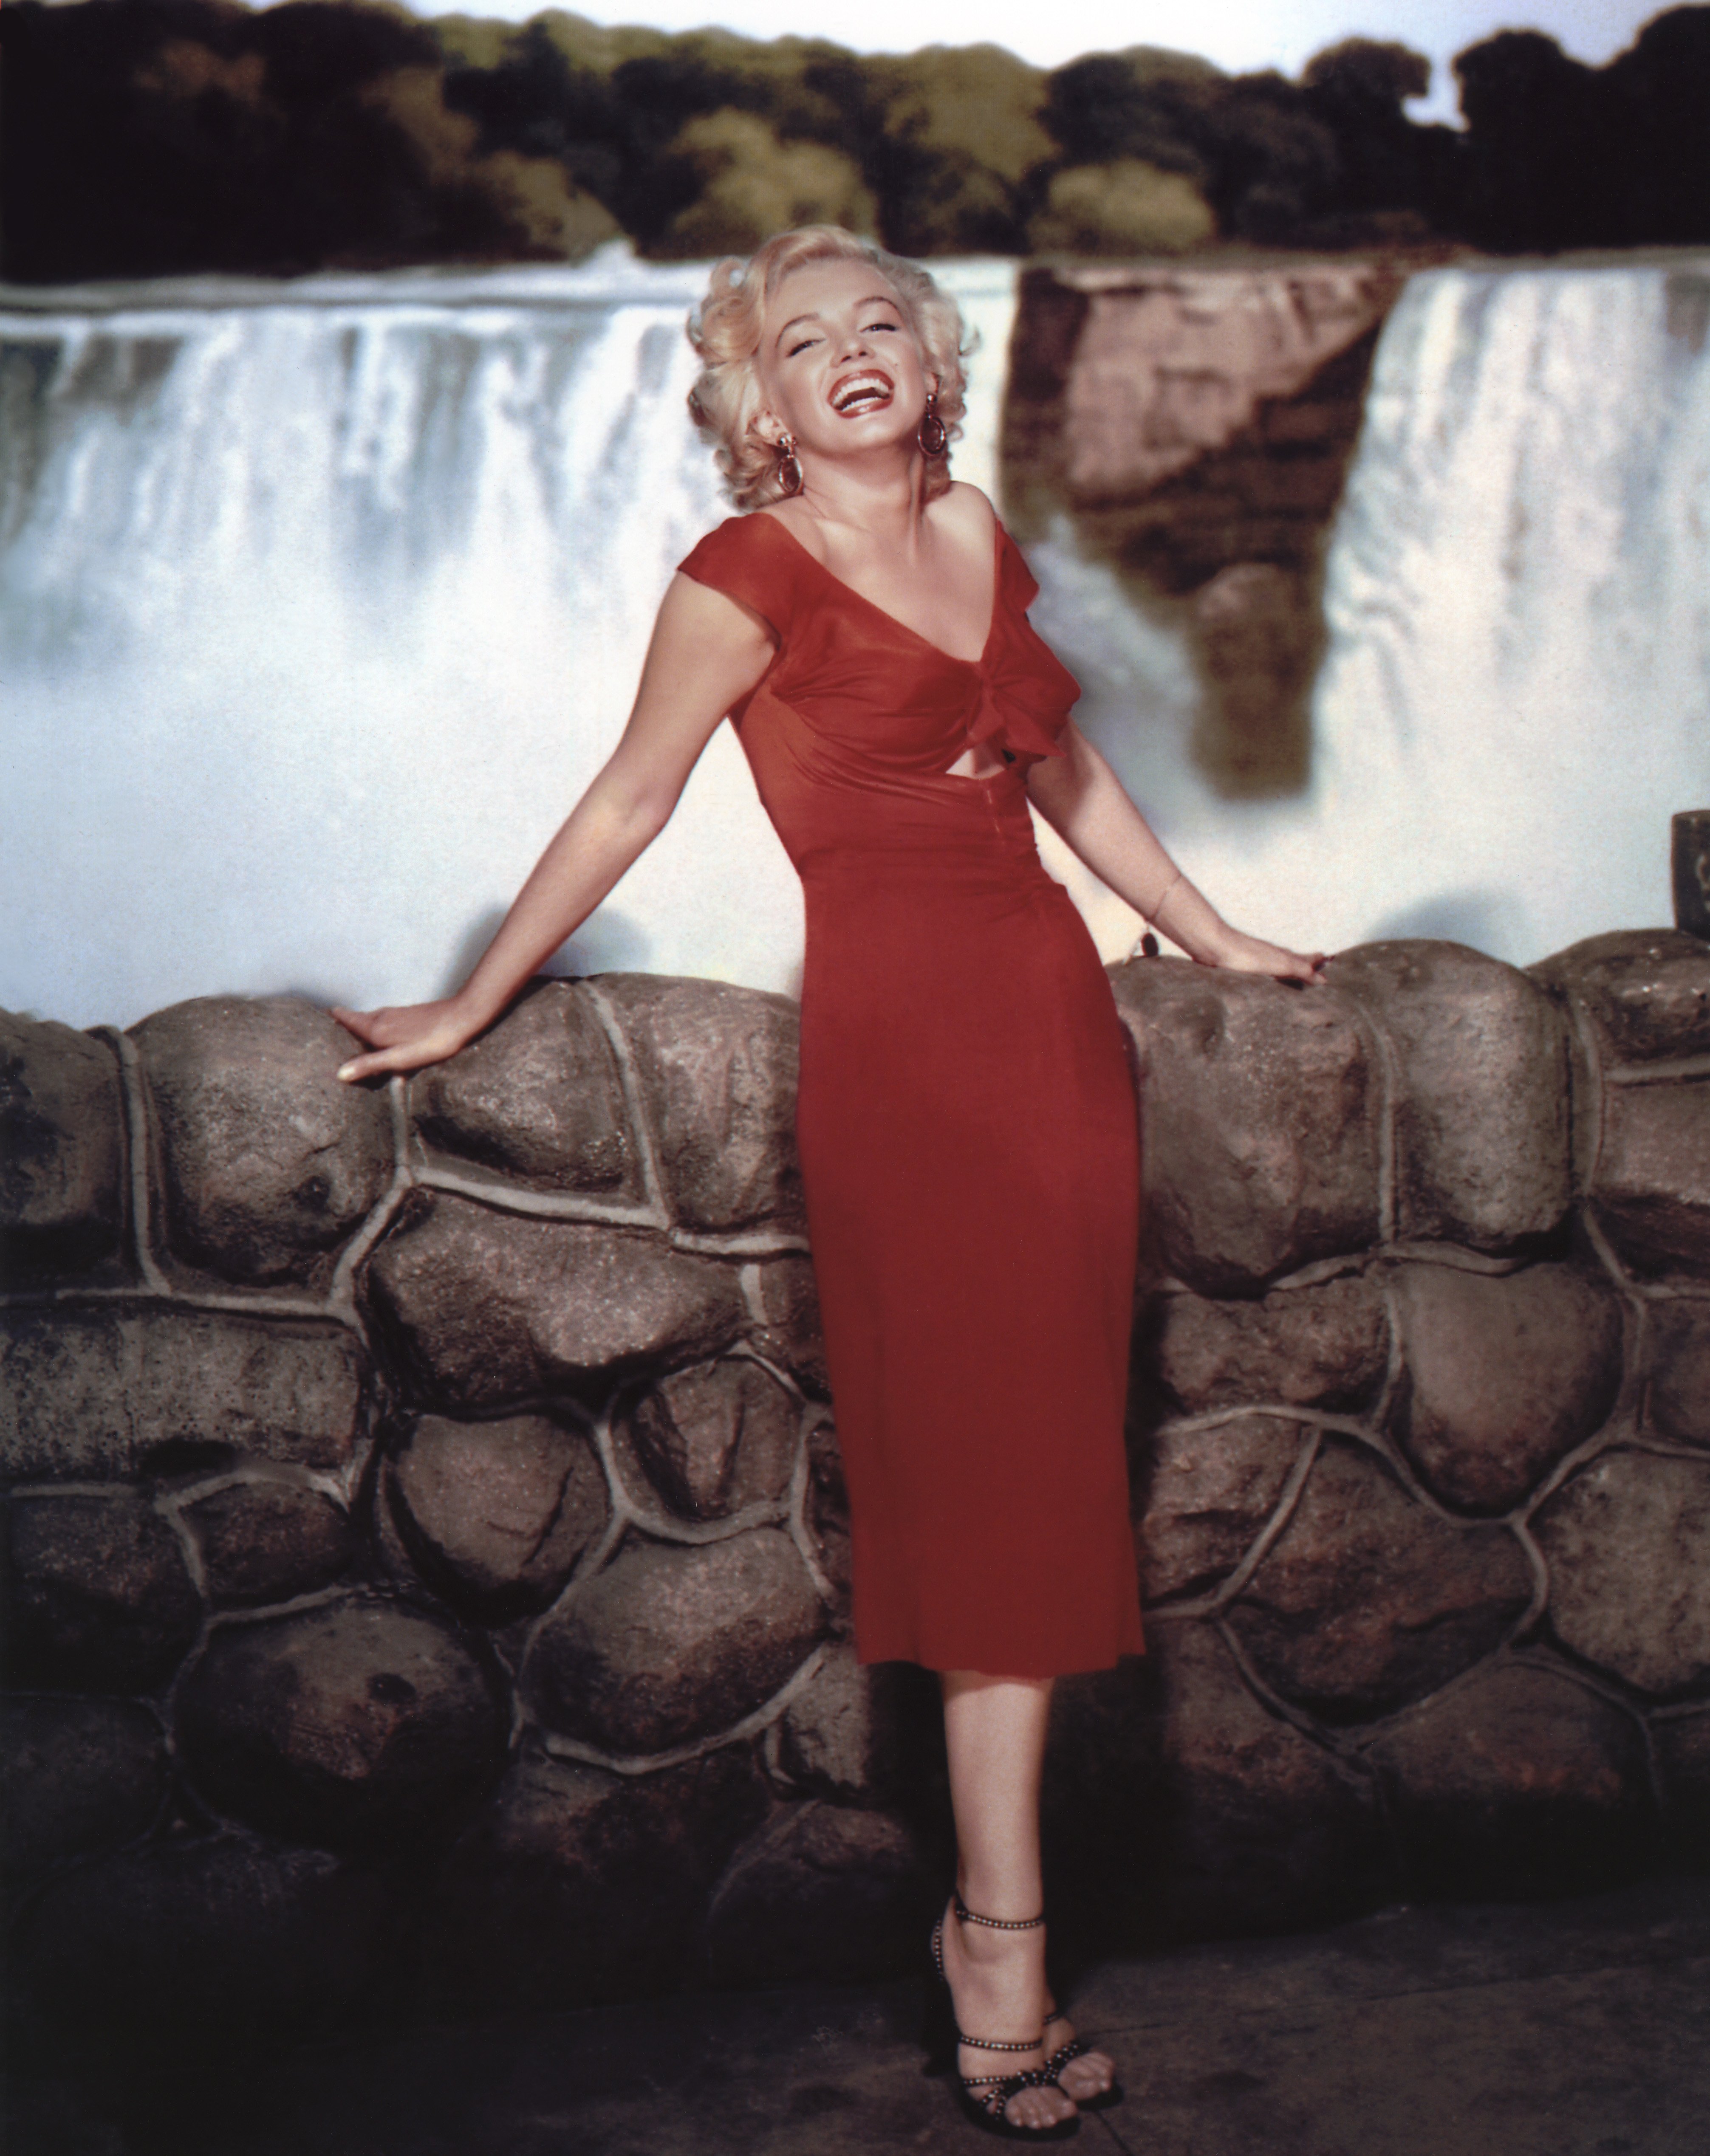 American actress Marilyn Monroe on the set of "Niagara" in 1952. | Source: Getty Images.